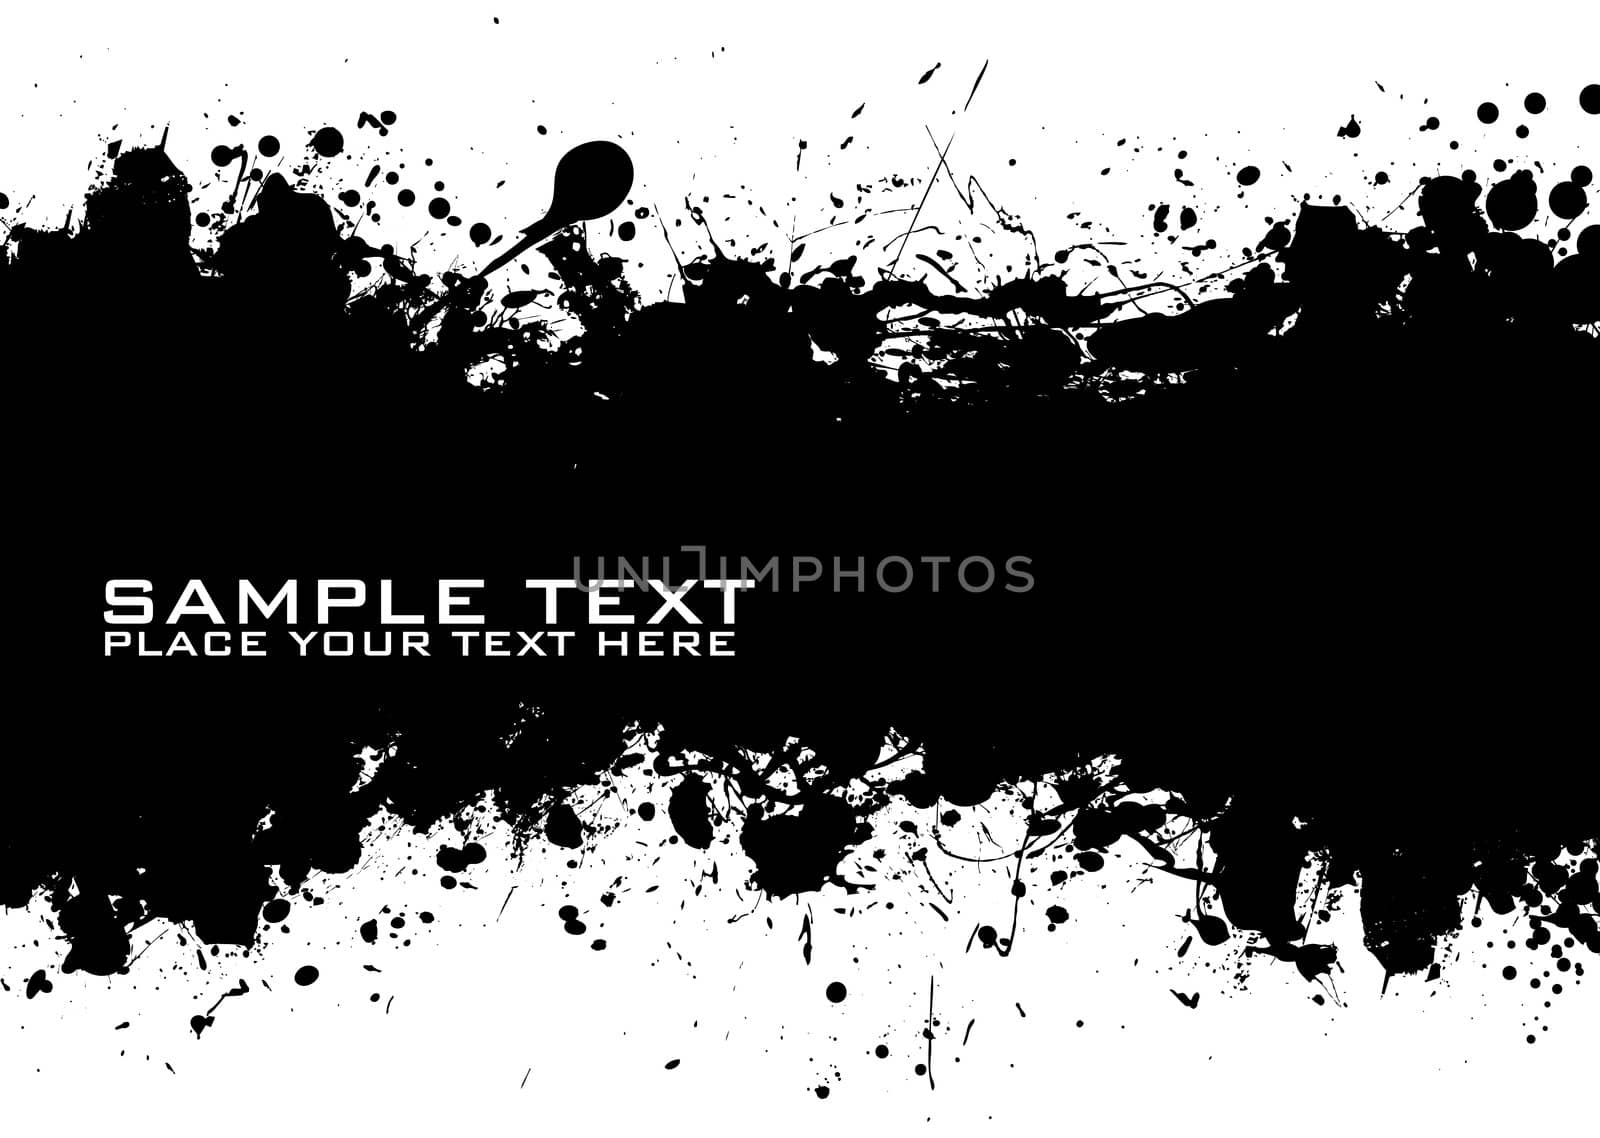 Sample text with black ink background and grunge effect